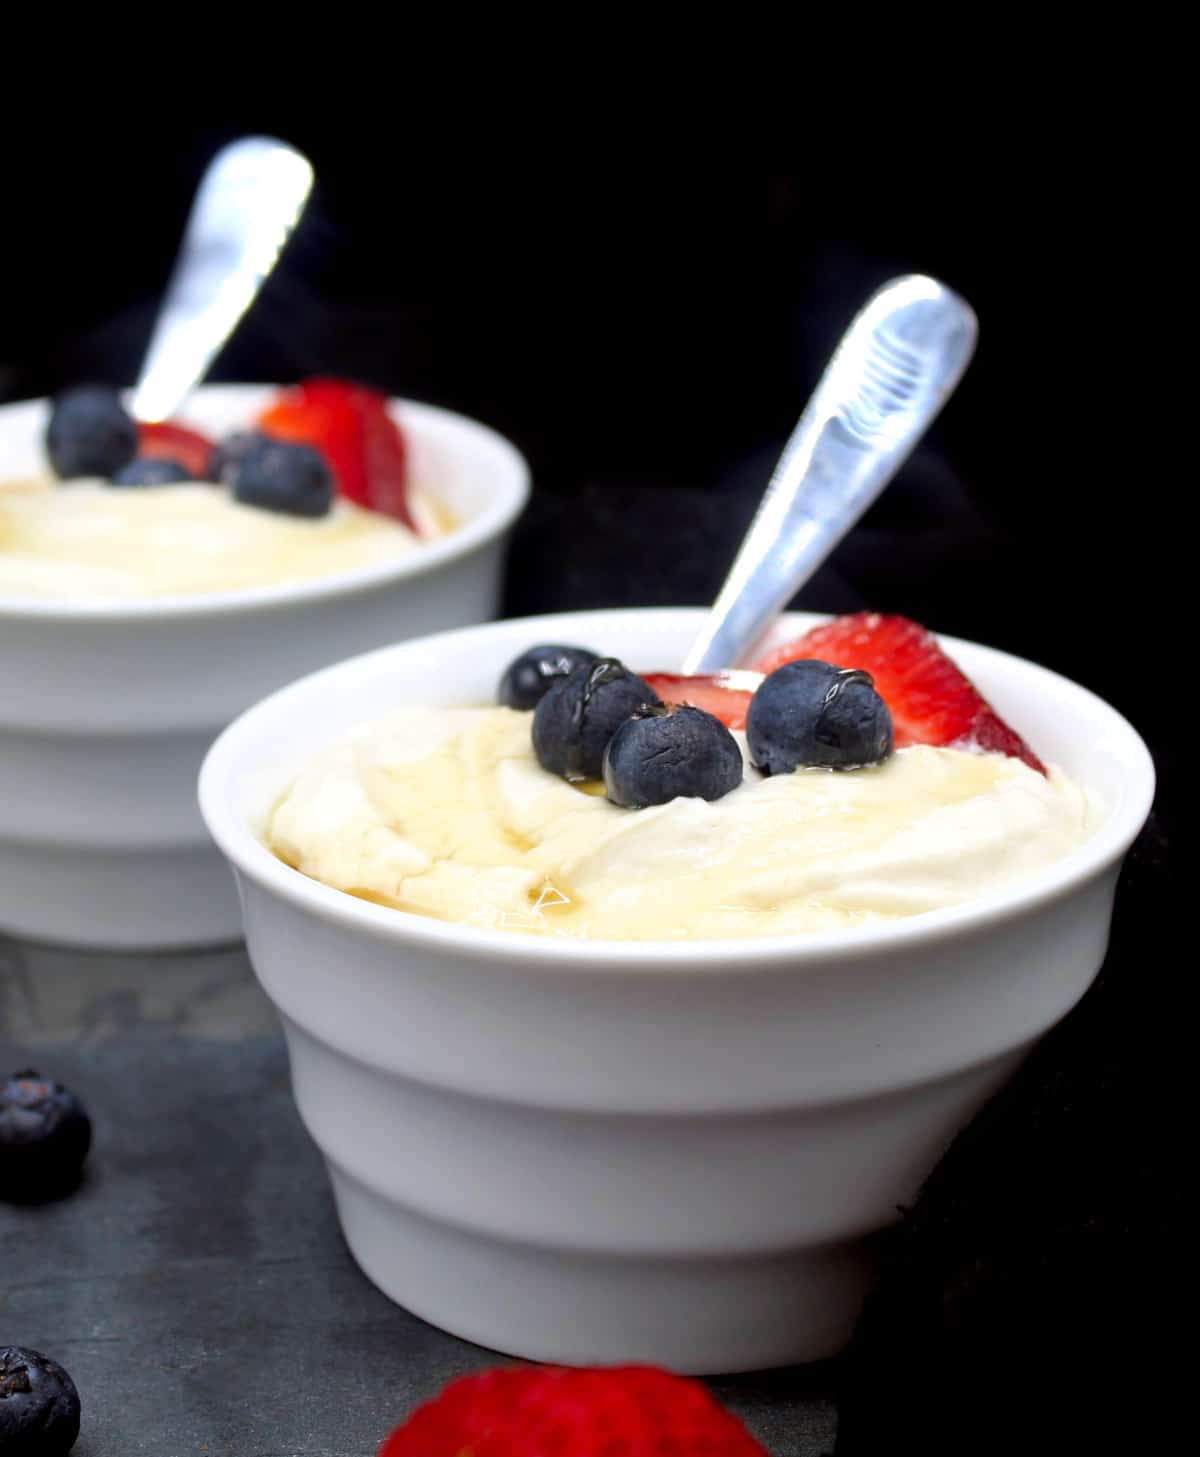 Bowls of vegan yogurt topped with strawberries and blueberries.